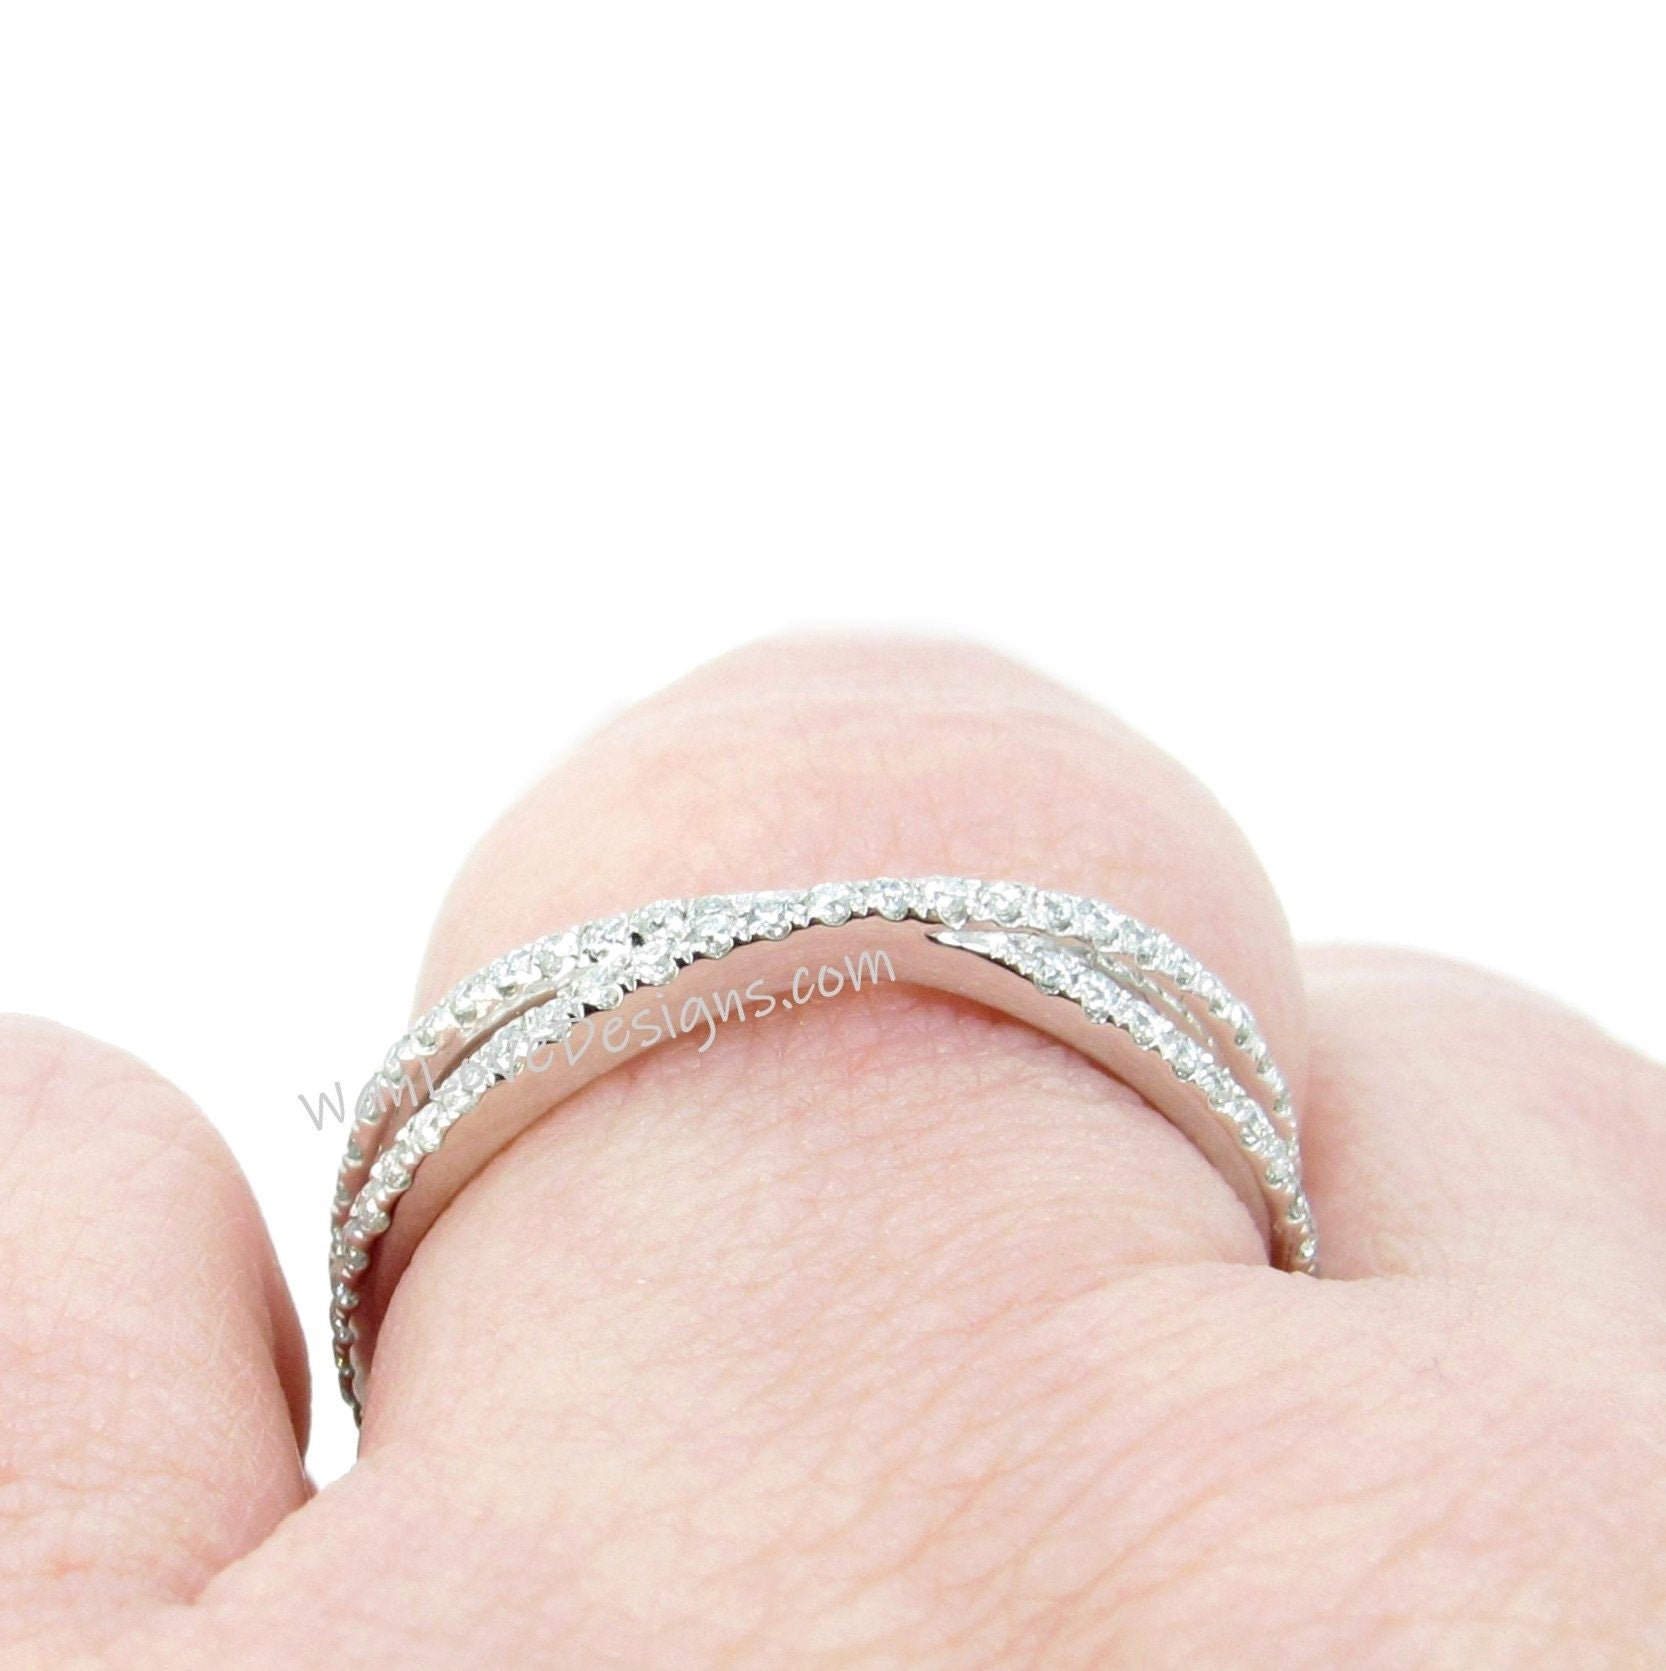 Pave X Ring • Criss Cross Diamond Ring • Almost Eternity Ring • Minimalist Jewelry • Double Band Ring • Gift for Her Wan Love Designs